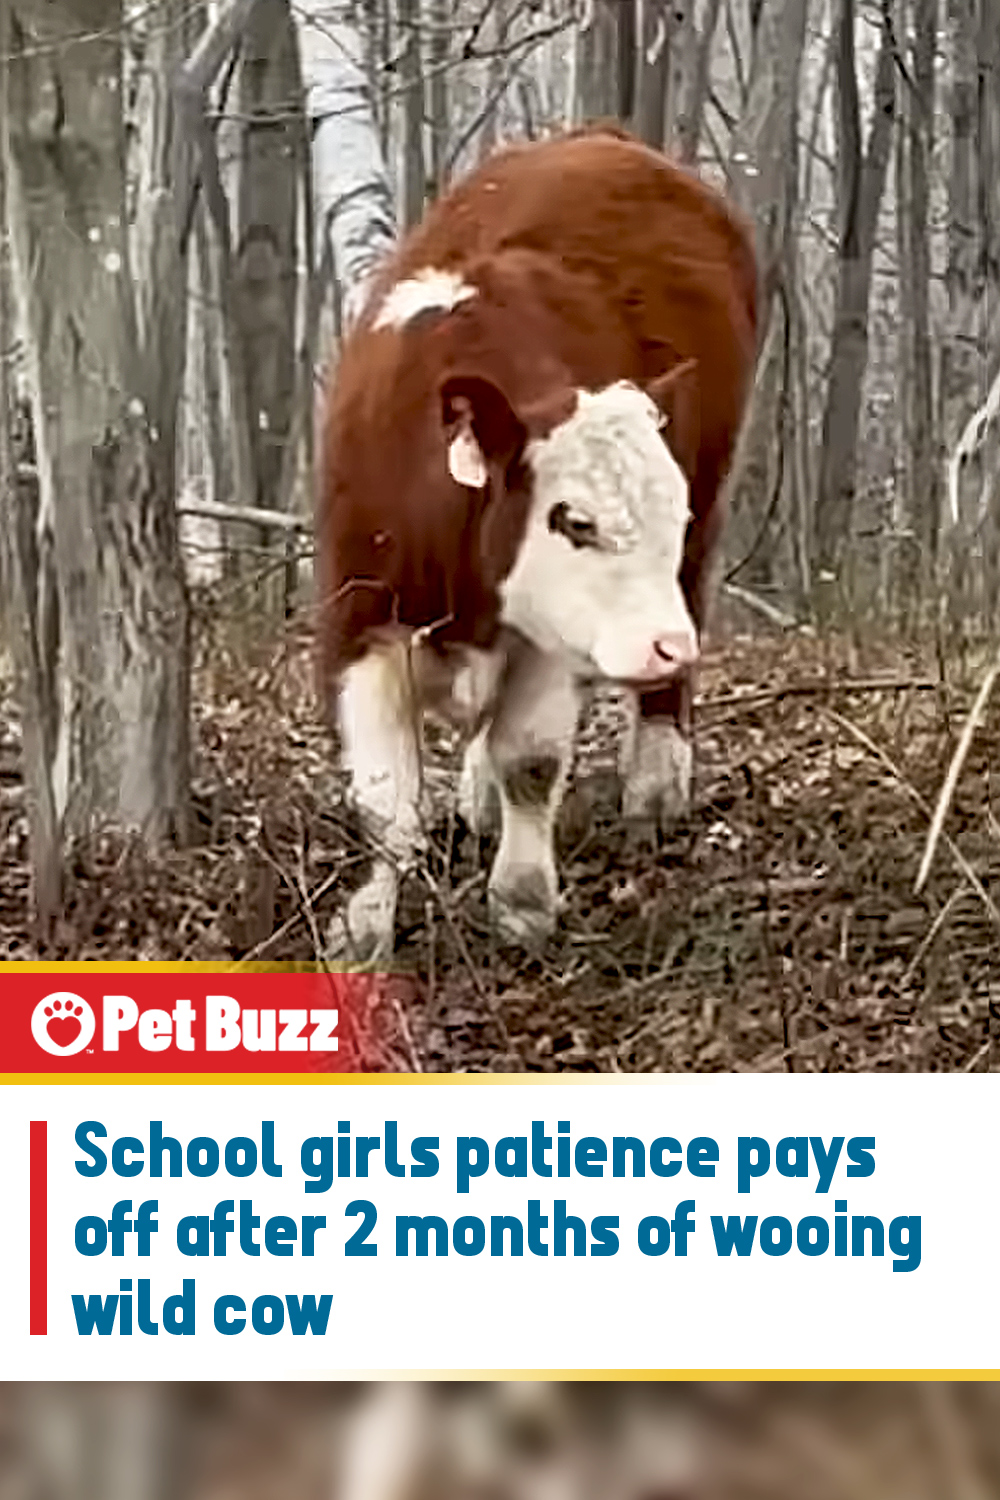 School girls patience pays off after 2 months of wooing wild cow